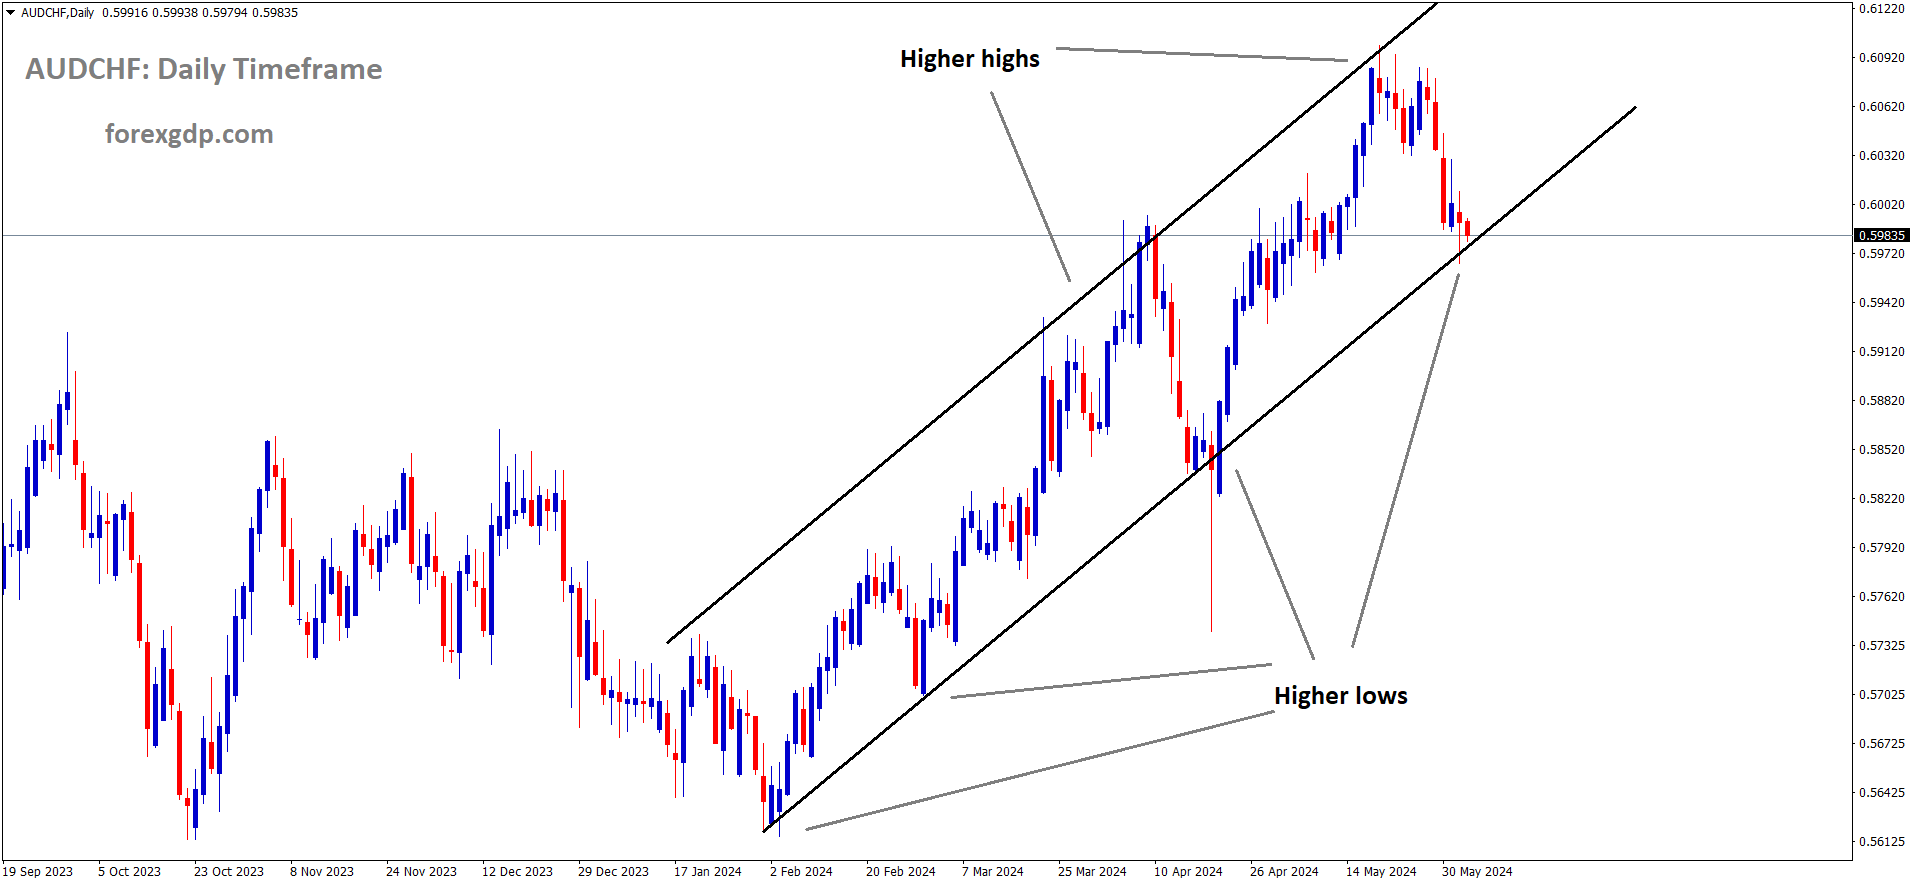 AUDCHF is moving in Ascending channel and market has reached higher low area of the channel